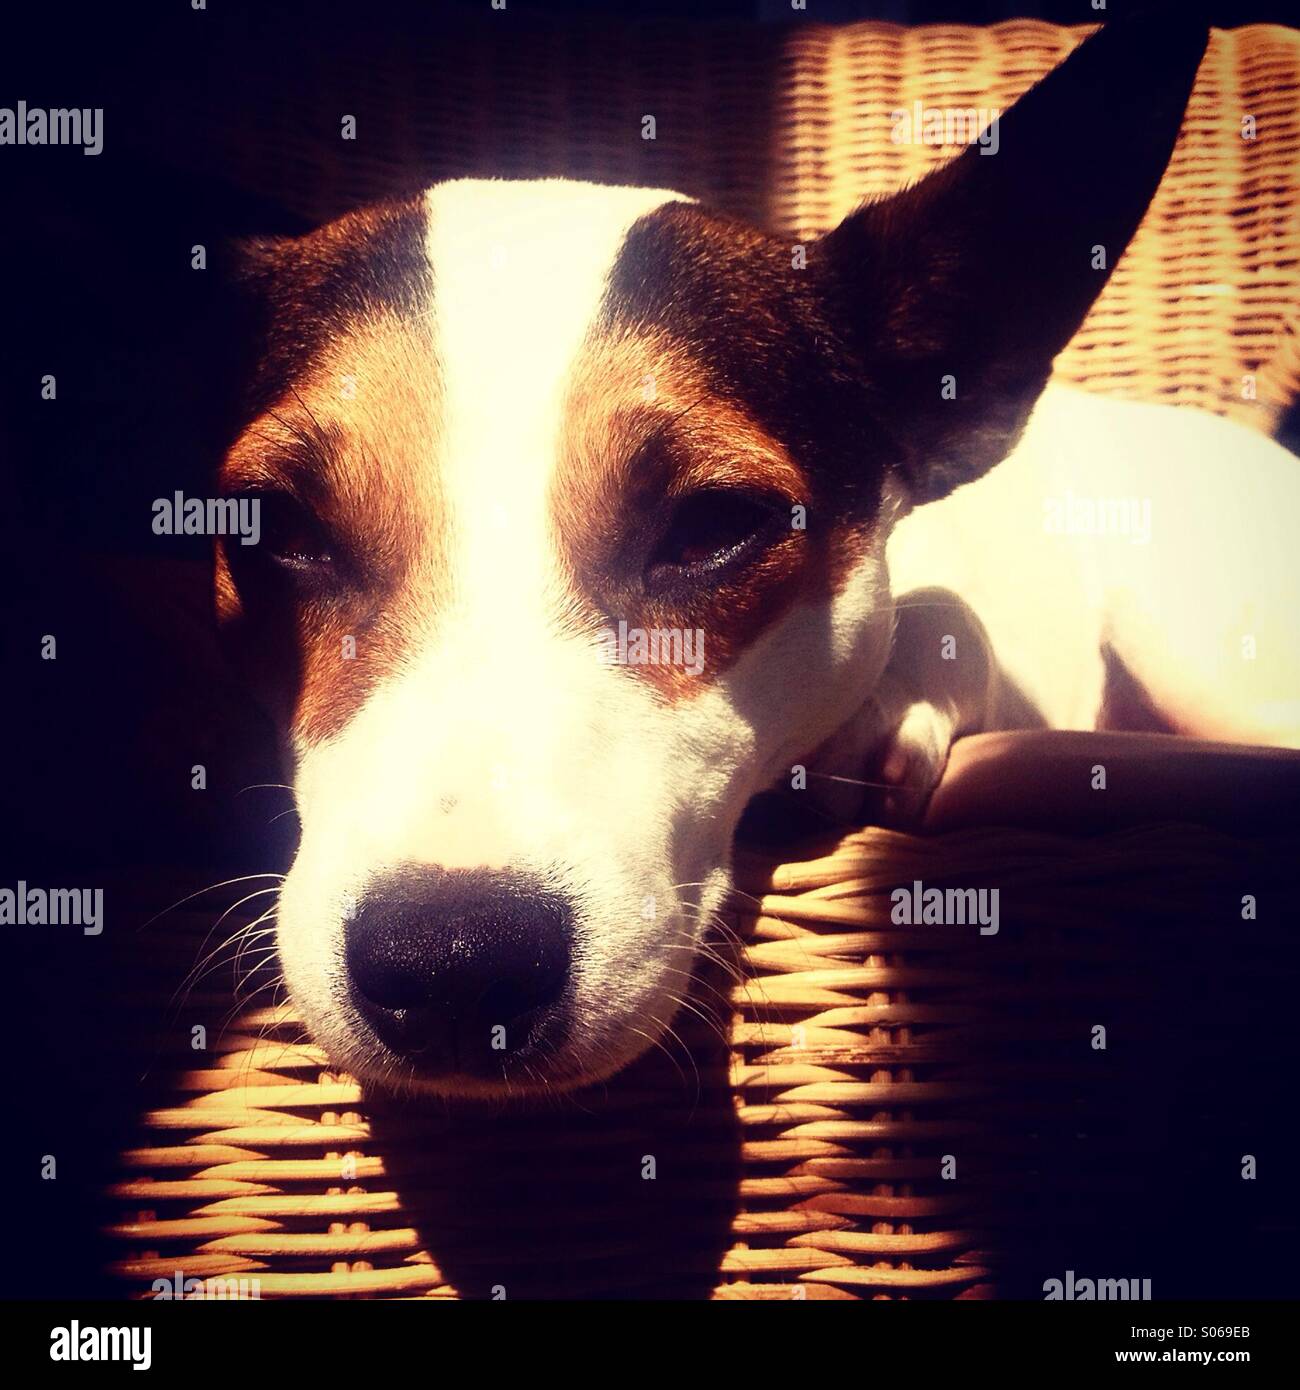 Sleepy dog. This Jack Russell puppy is about to fall asleep, enjoying the warm sun. Stock Photo